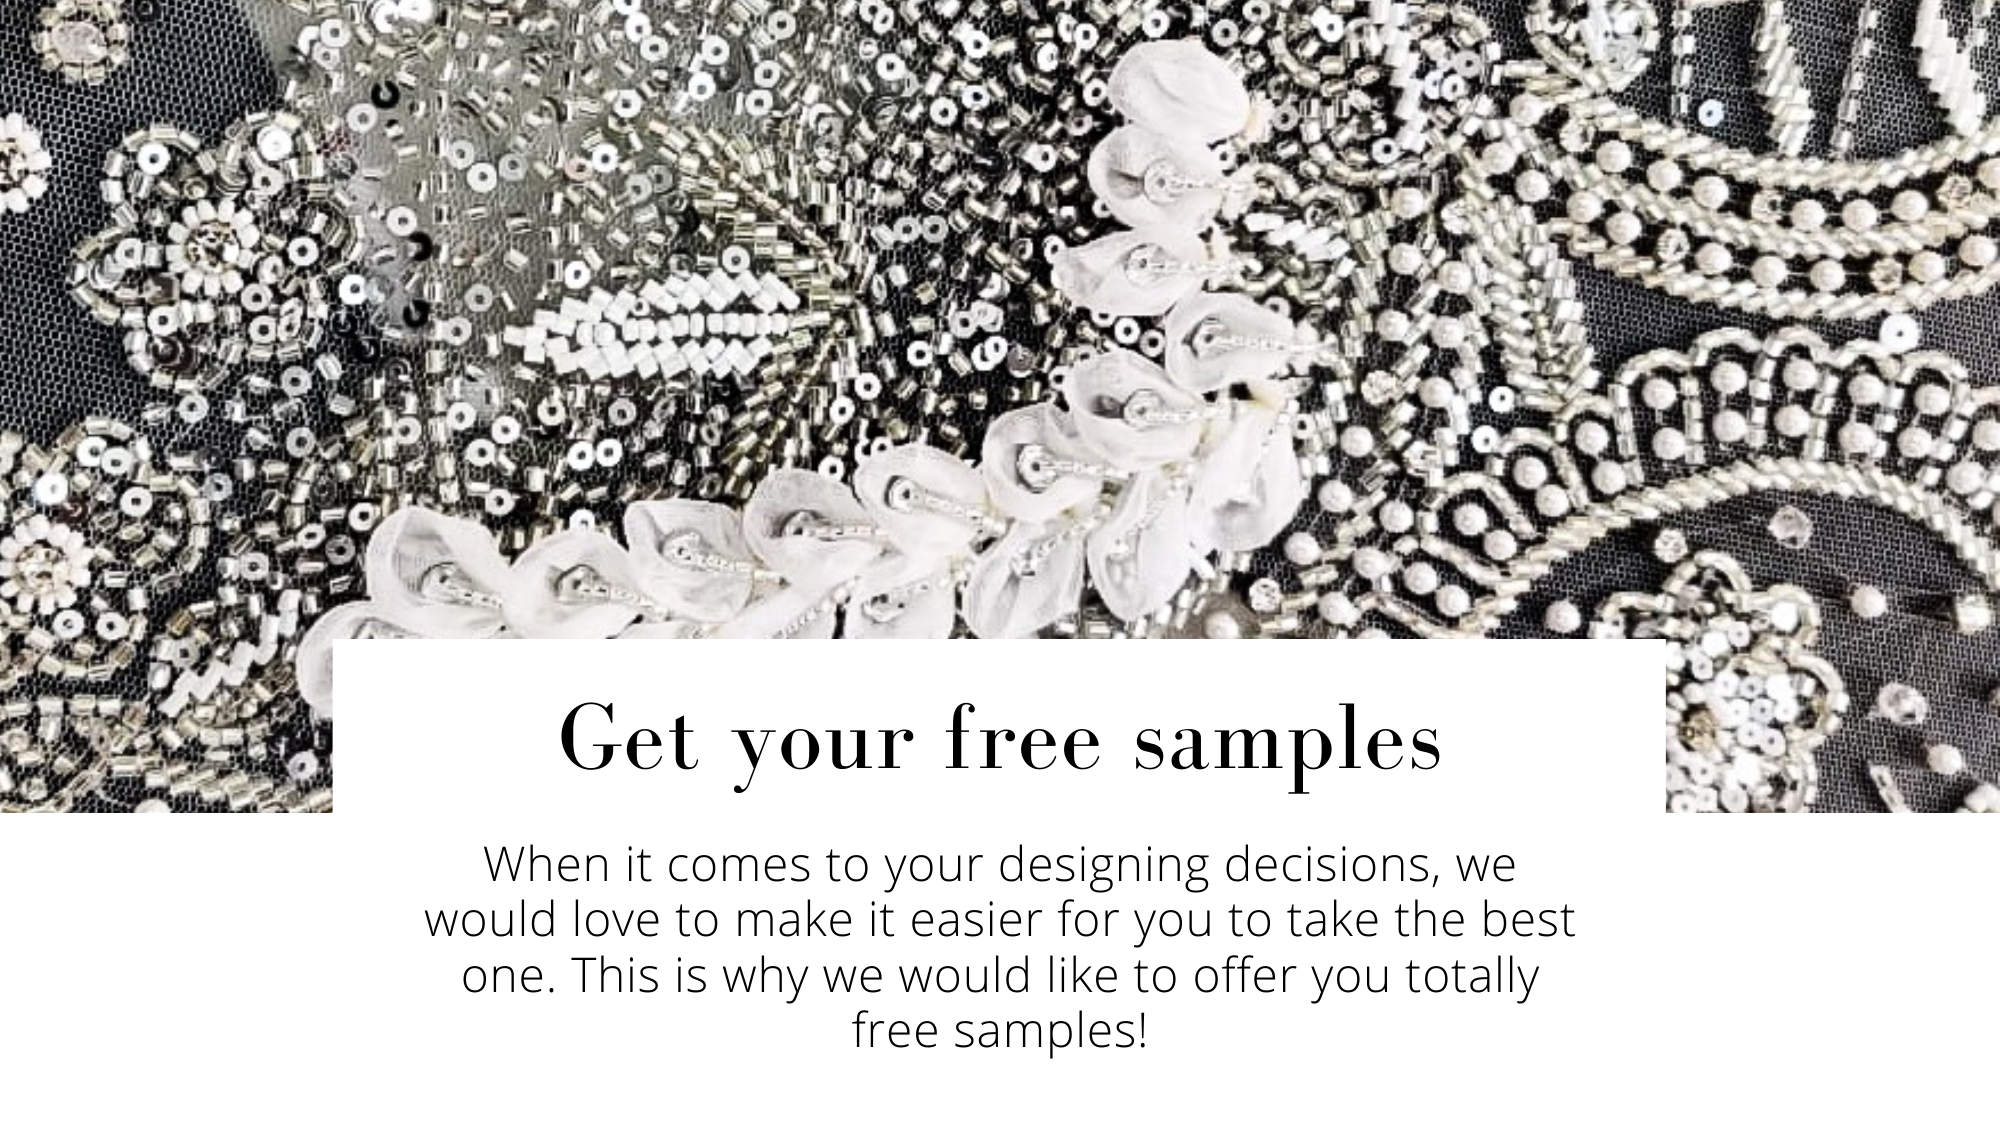 Claim your free samples